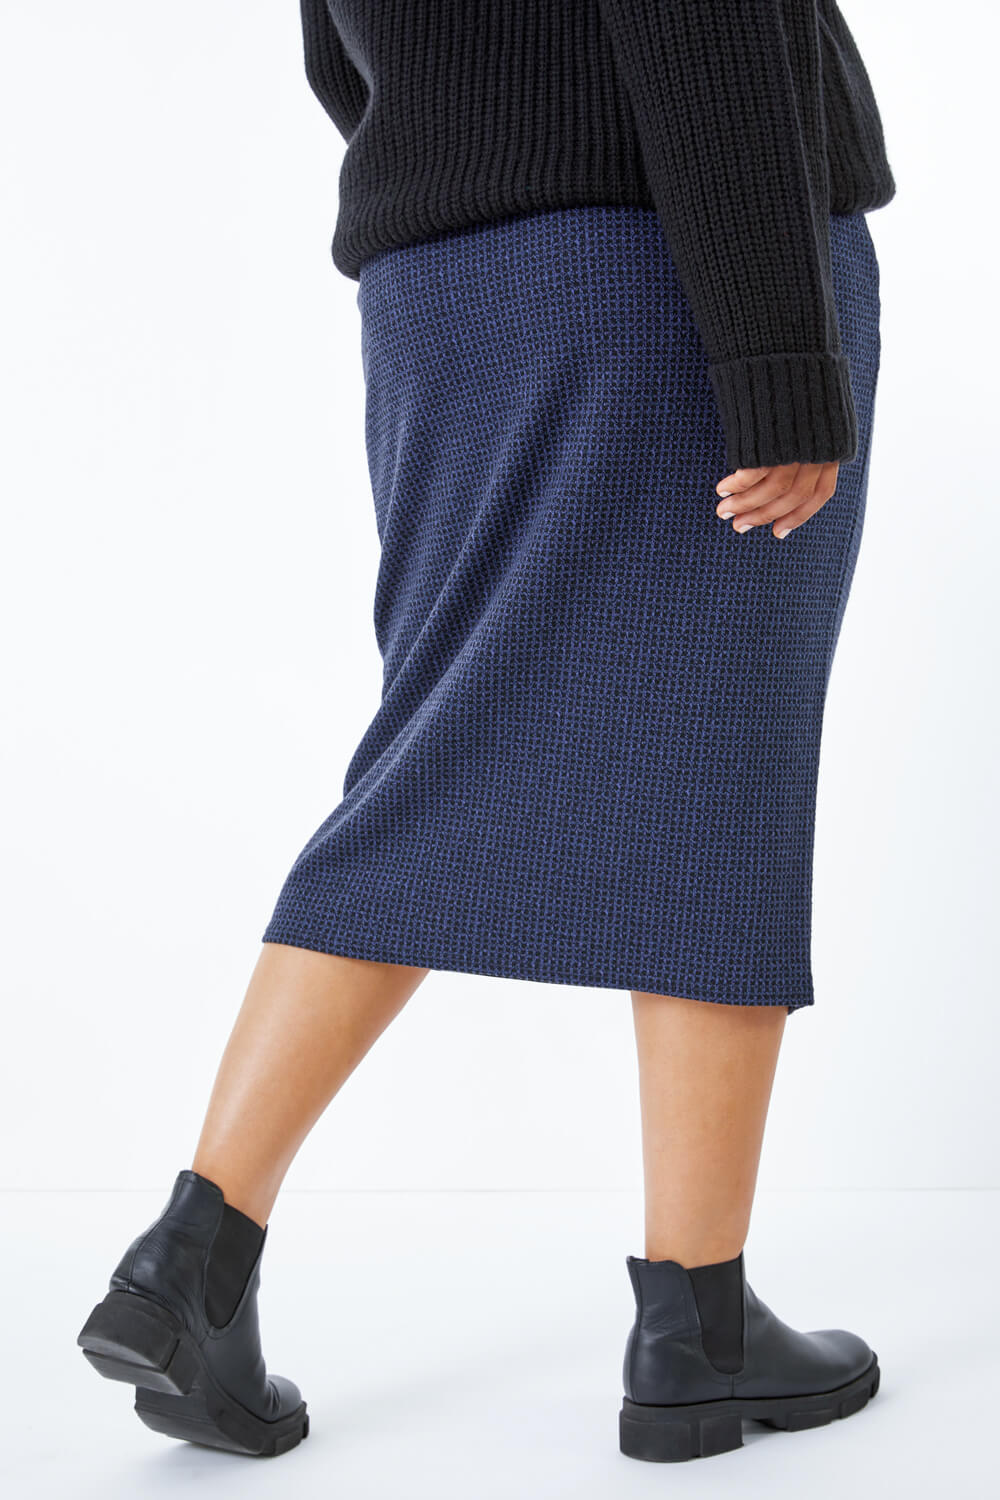 Navy  Curve Check Stretch Pencil Skirt, Image 4 of 5